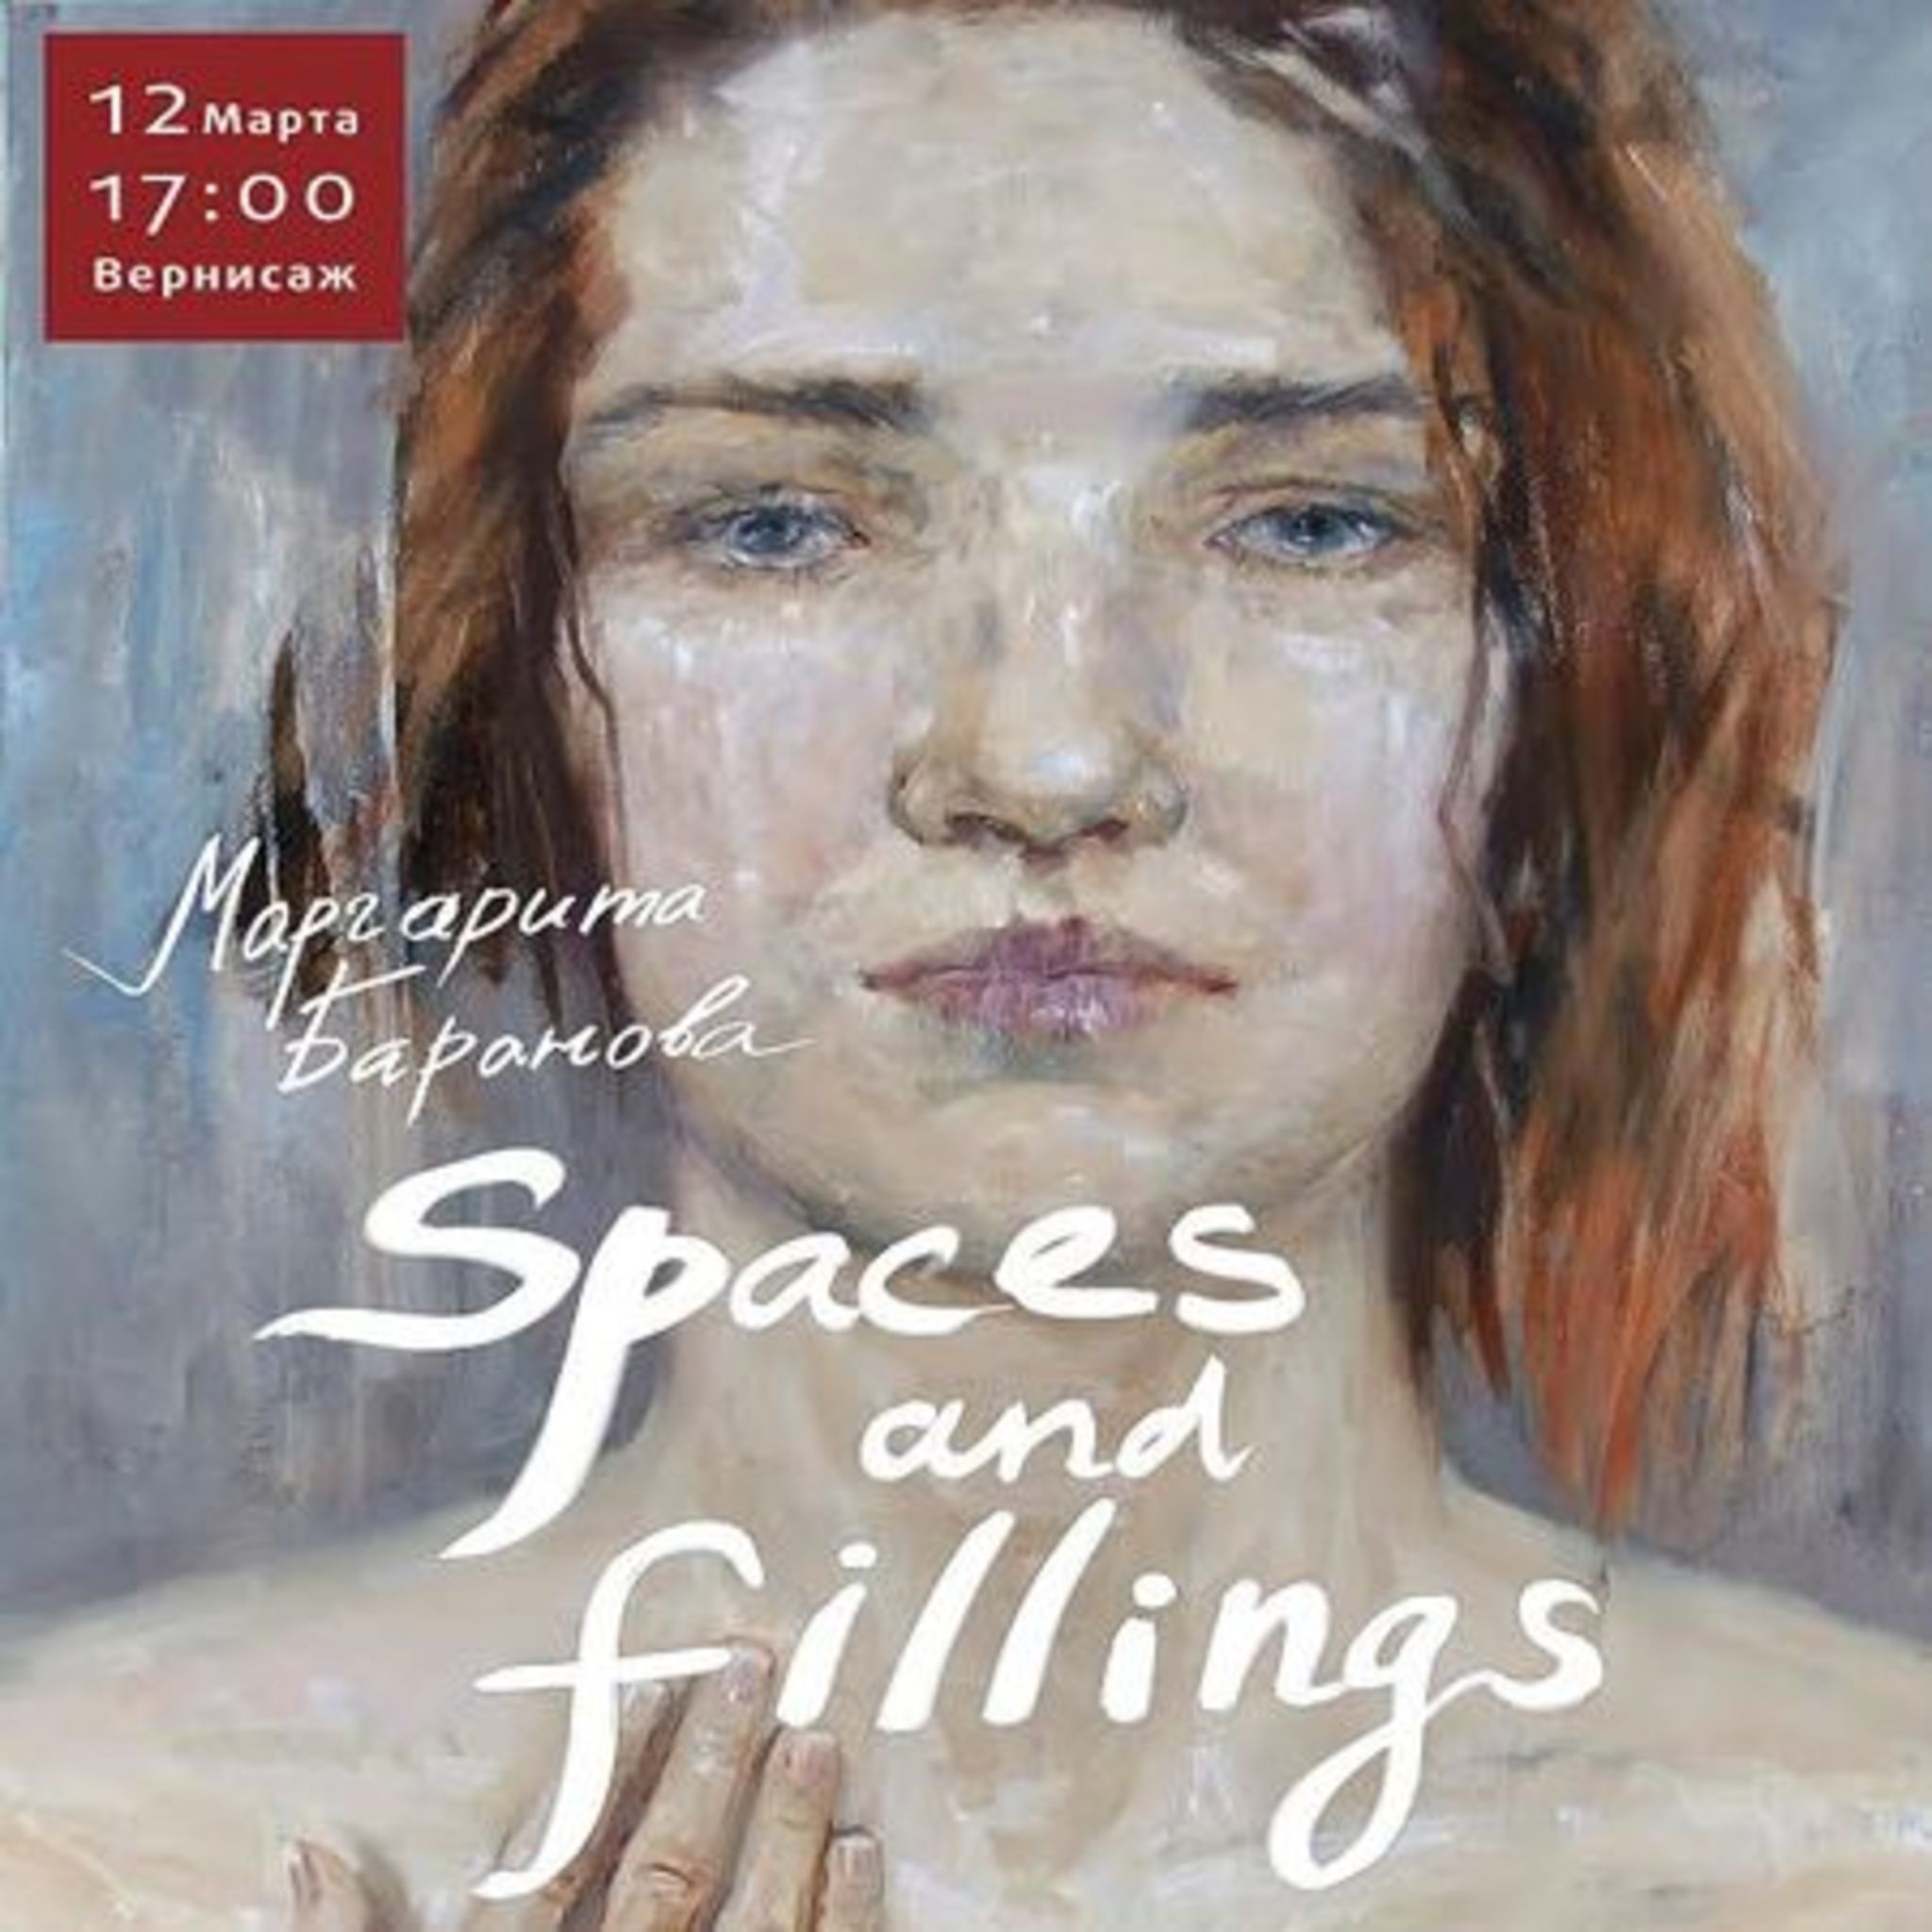 Exhibition SPACES AND FEELINGS